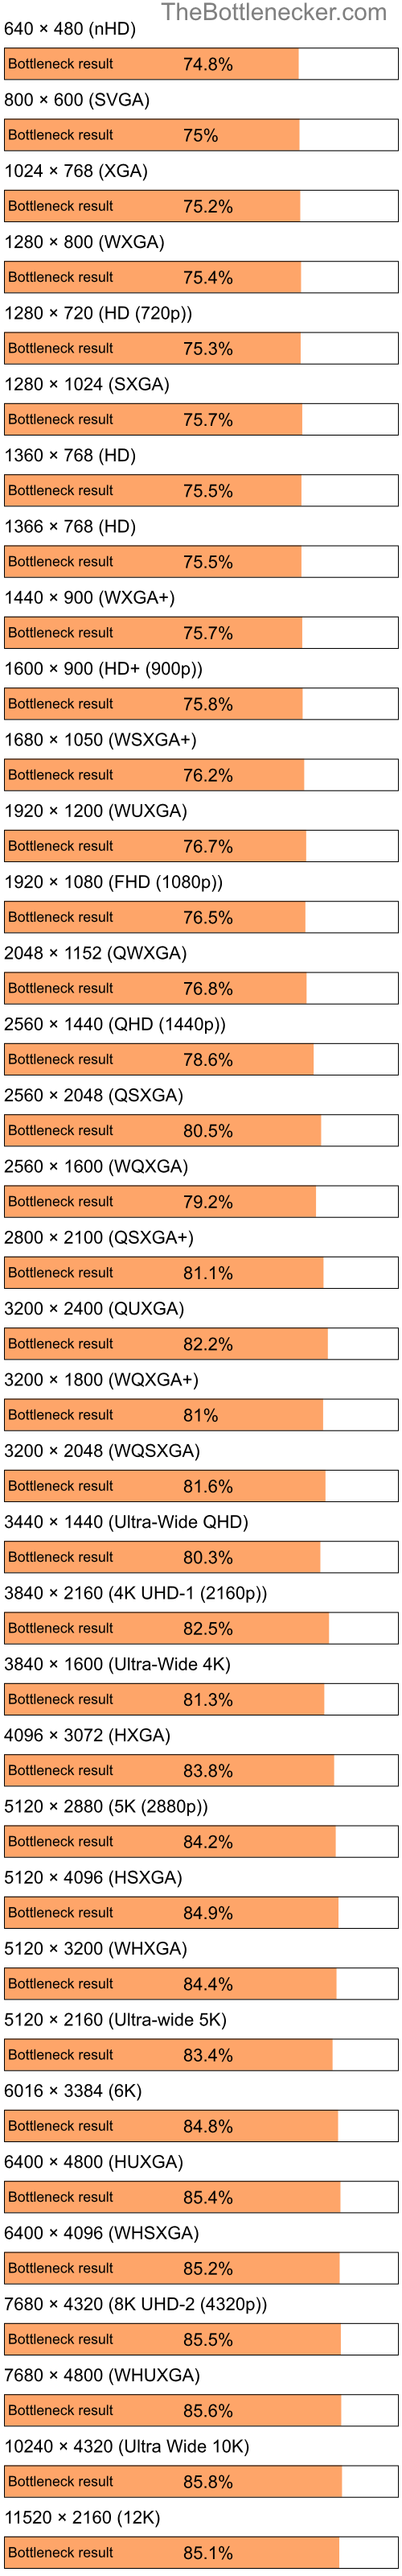 Bottleneck results by resolution for Intel Celeron and AMD Mobility Radeon X1350 in General Tasks